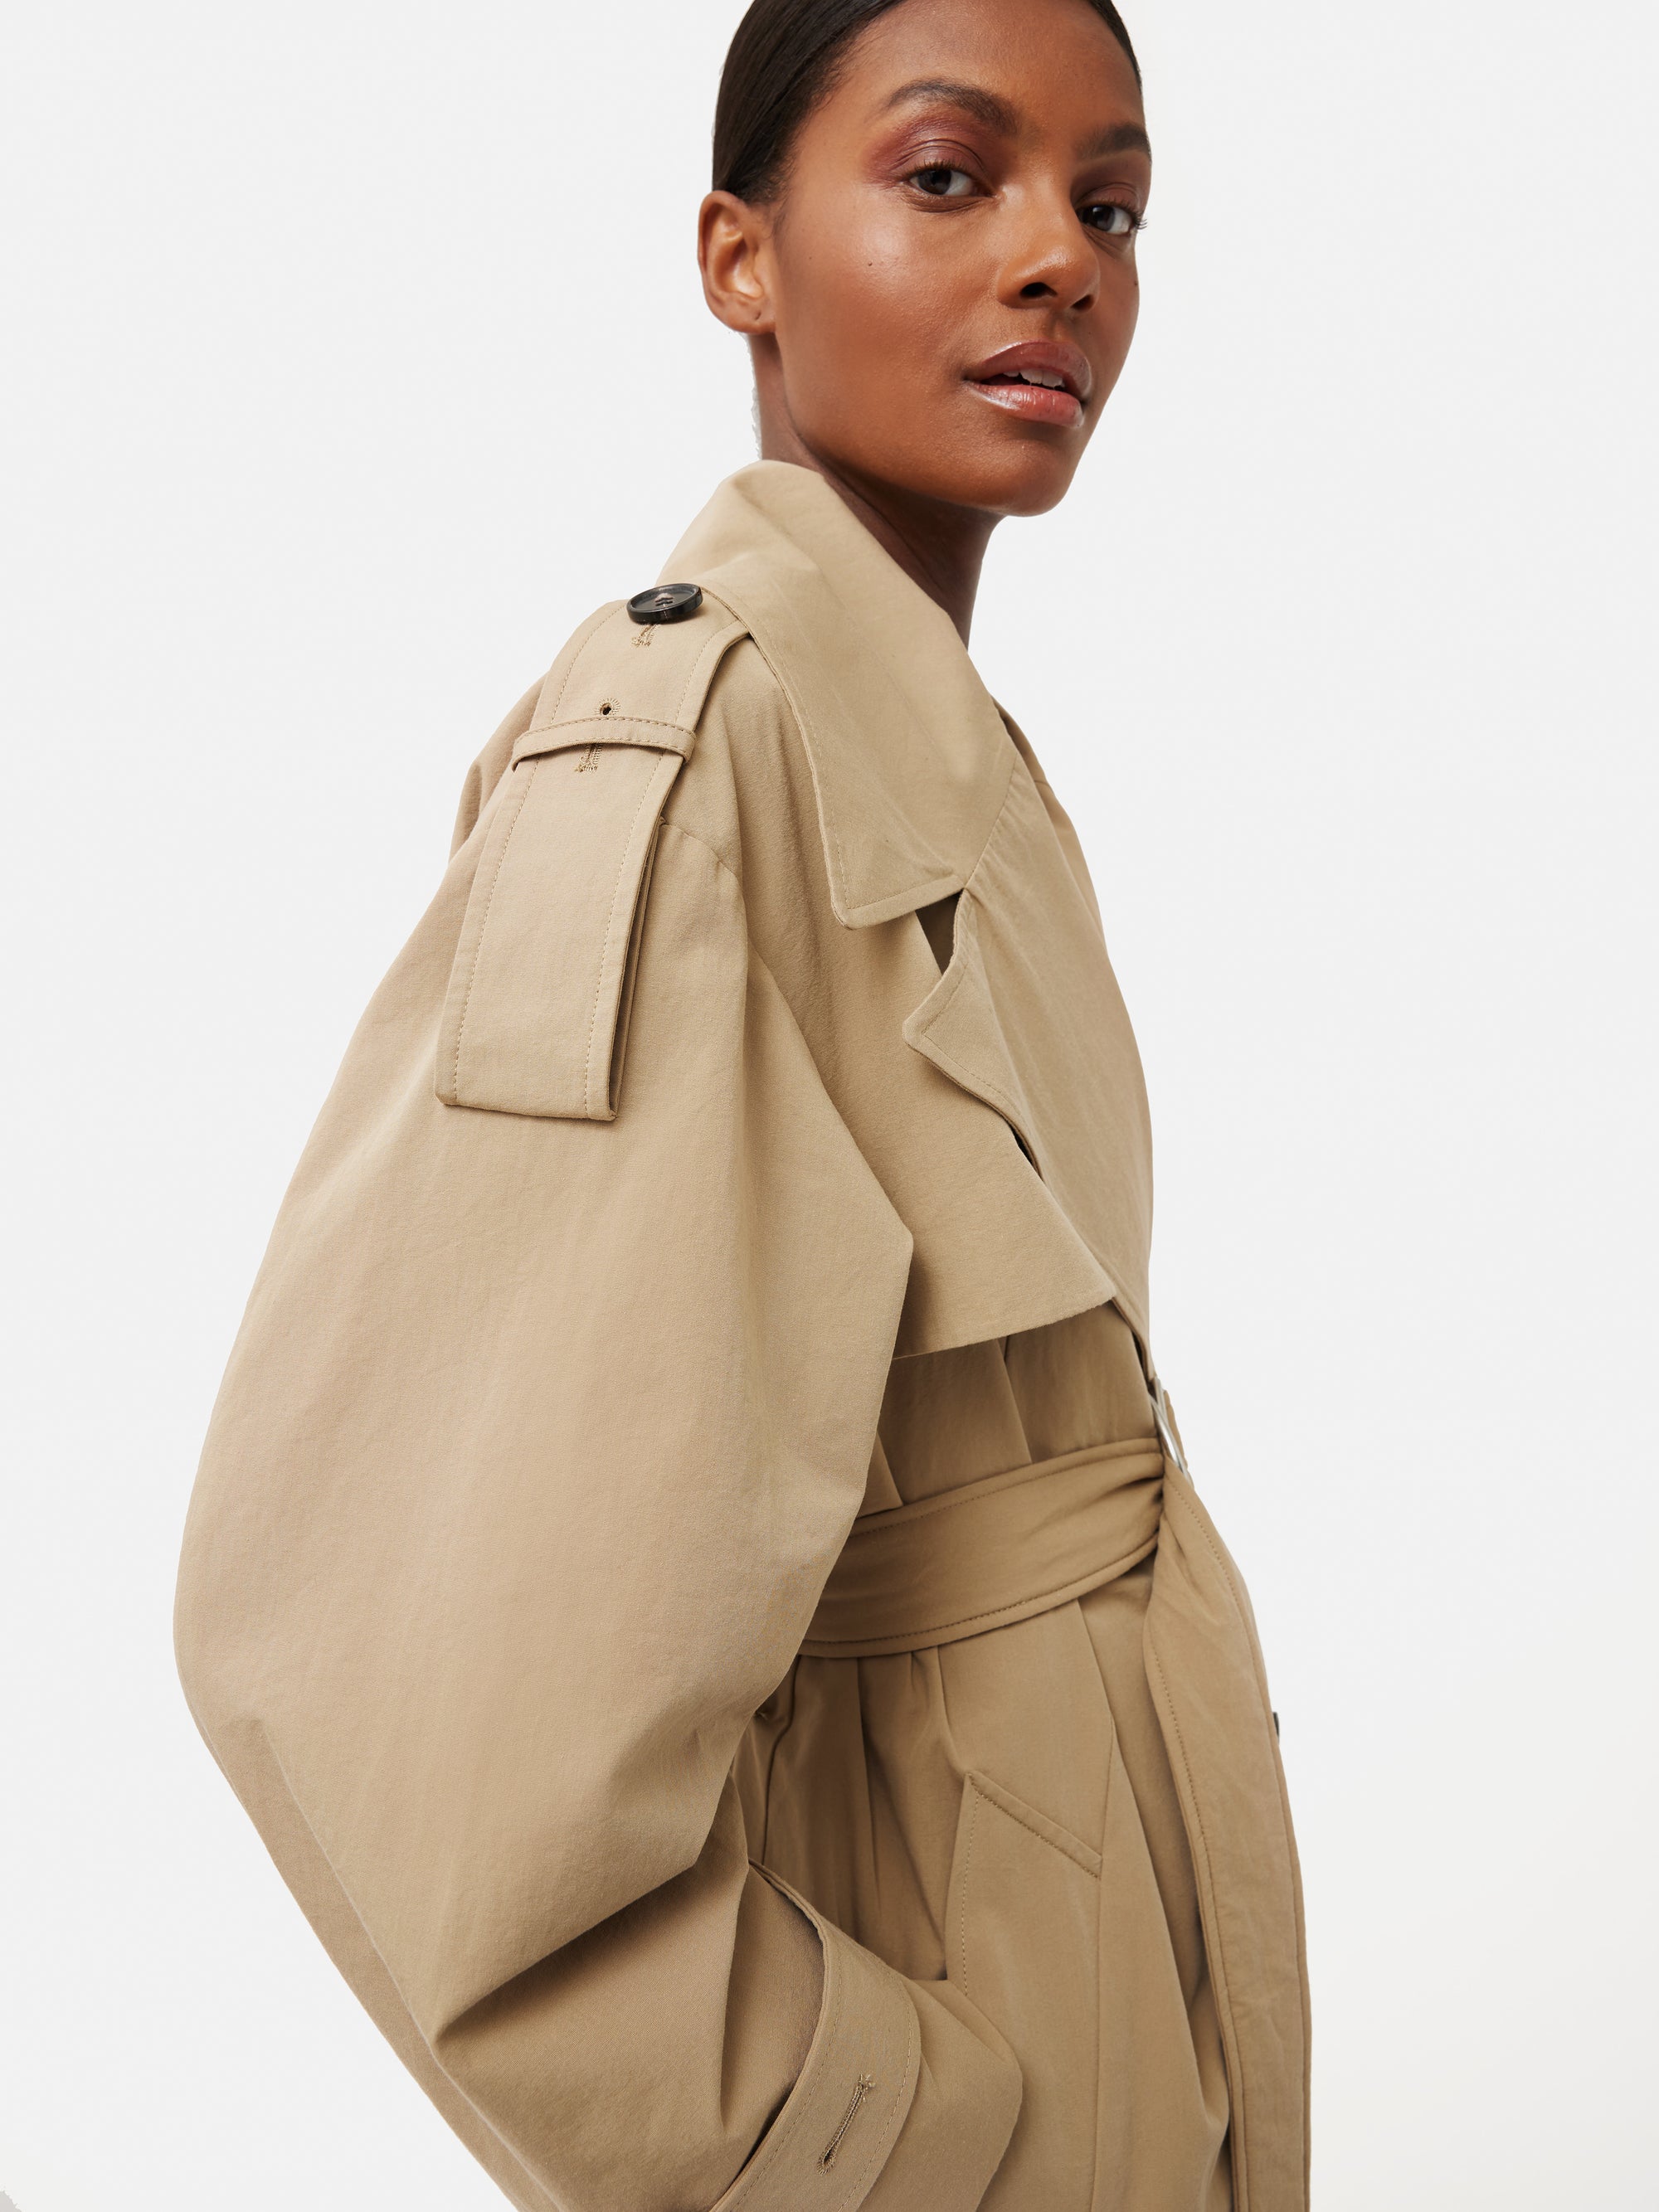 The 20 Best Trench Coats for Women That Will Outlast the Trend